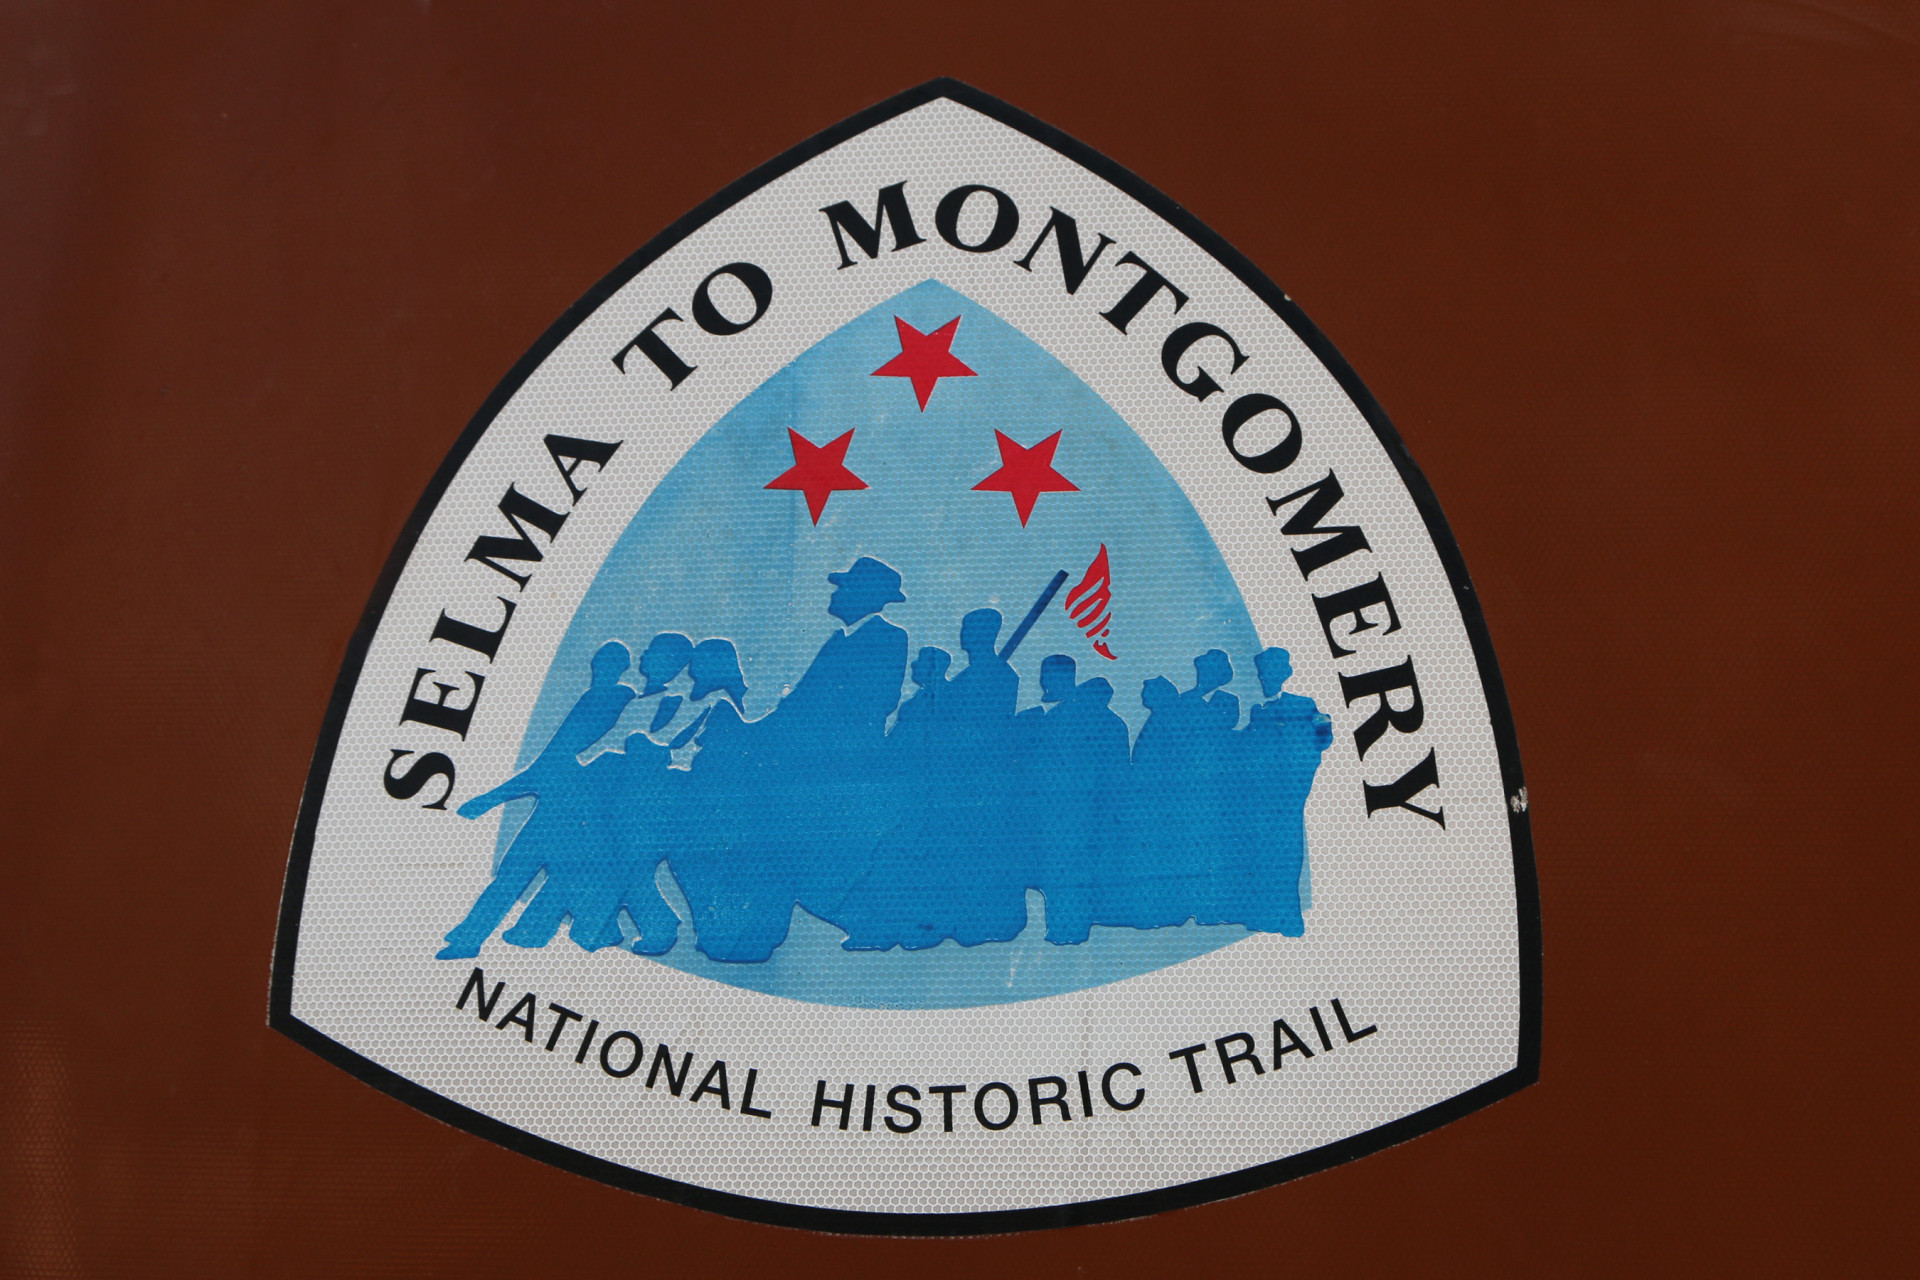 The route the marchers took is now a designated National Historic Trail.<p><a href="https://www.msn.com/en-us/community/channel/vid-7xx8mnucu55yw63we9va2gwr7uihbxwc68fxqp25x6tg4ftibpra?cvid=94631541bc0f4f89bfd59158d696ad7e">Follow us and access great exclusive content every day</a></p>